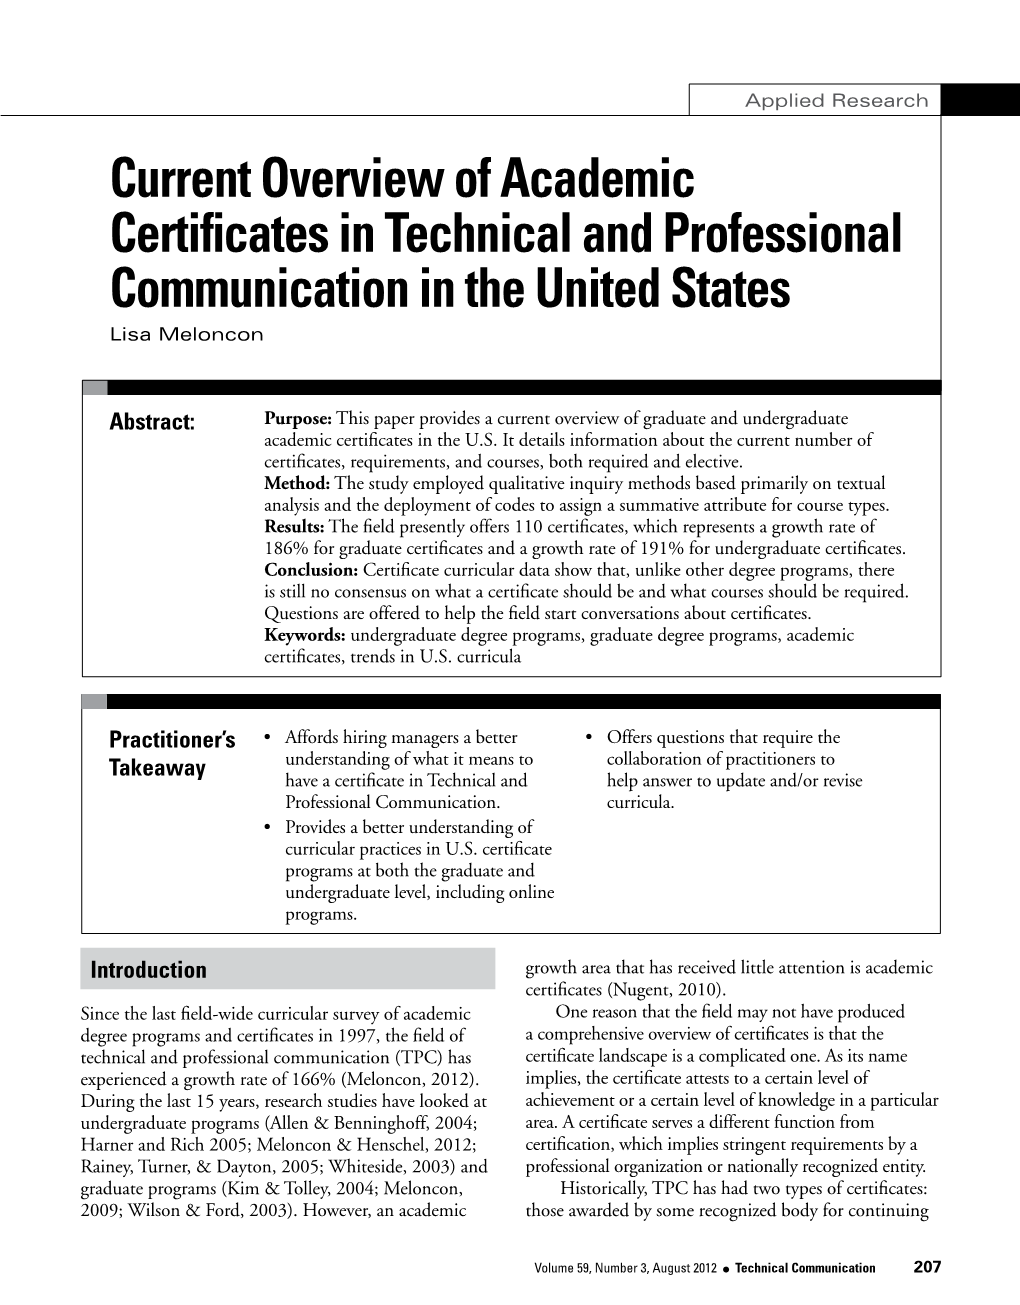 Current Overview of Academic Certificates in Technical and Professional Communication in the United States Lisa Meloncon